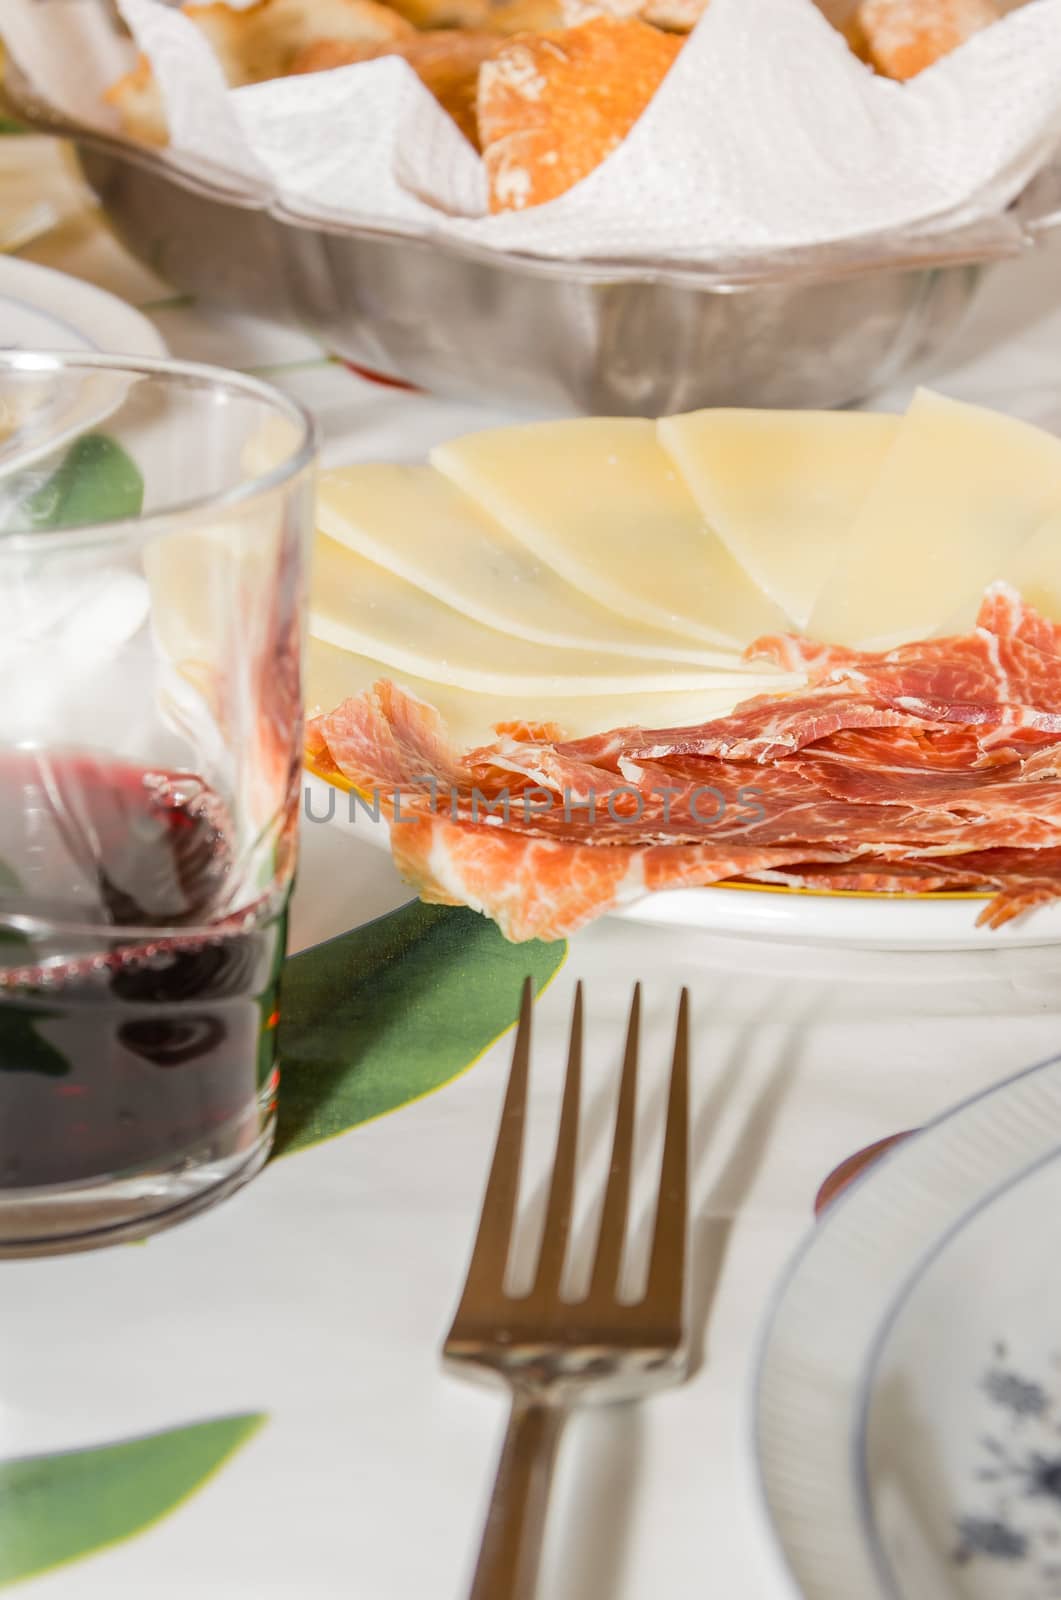 Typical spanish tapa with slices of serrano ham and manchego che by doble.d